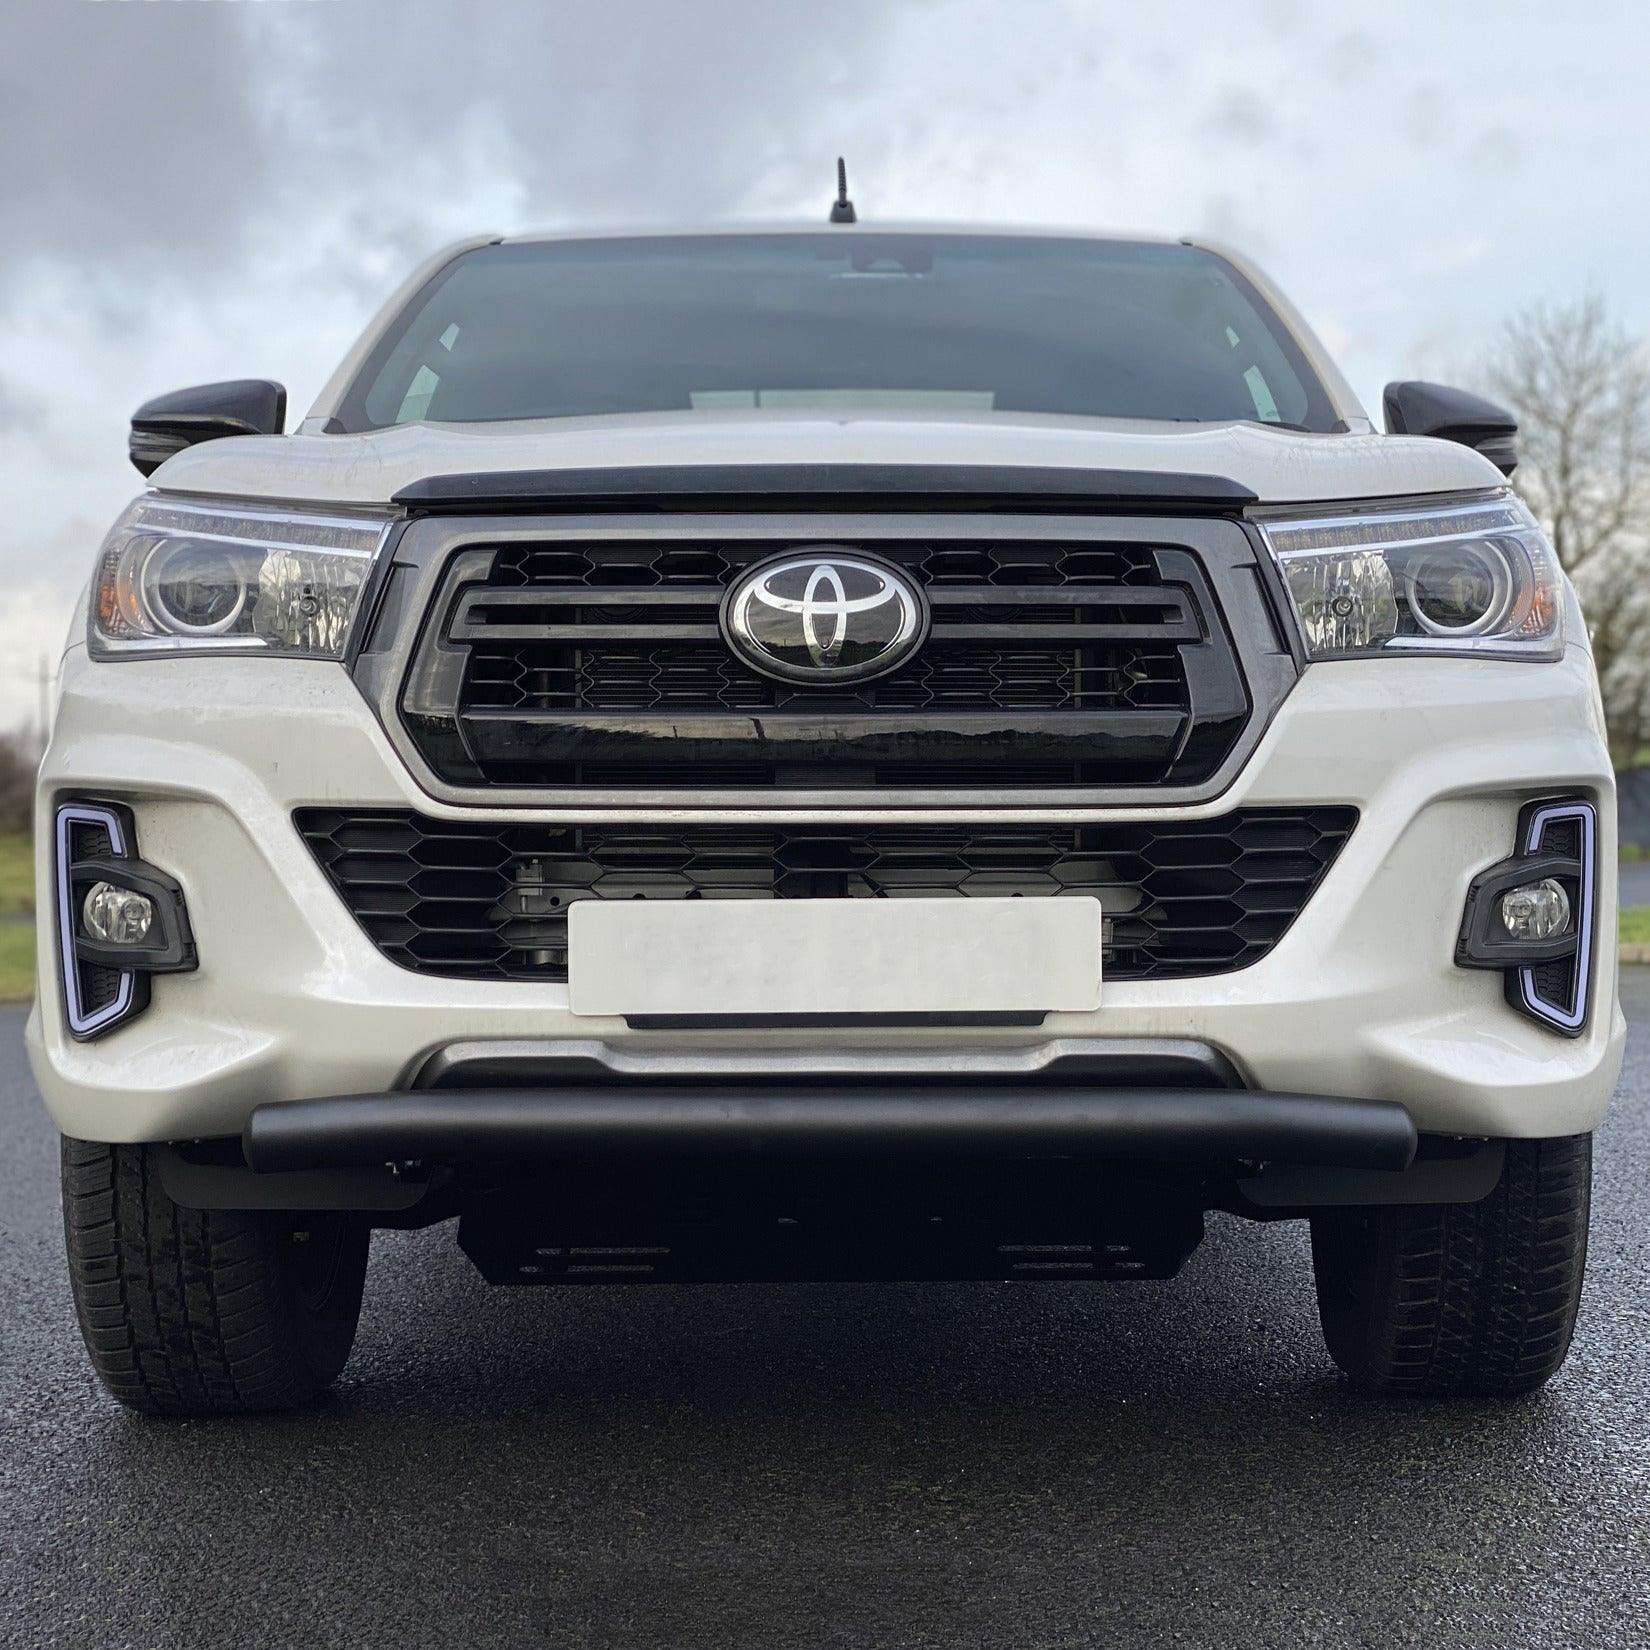 TOYOTA HILUX 2019 ON - FACELIFT FOG LIGHT SURROUNDS WITH LED'S (INVINCIBLE X ONLY) - Storm Xccessories2